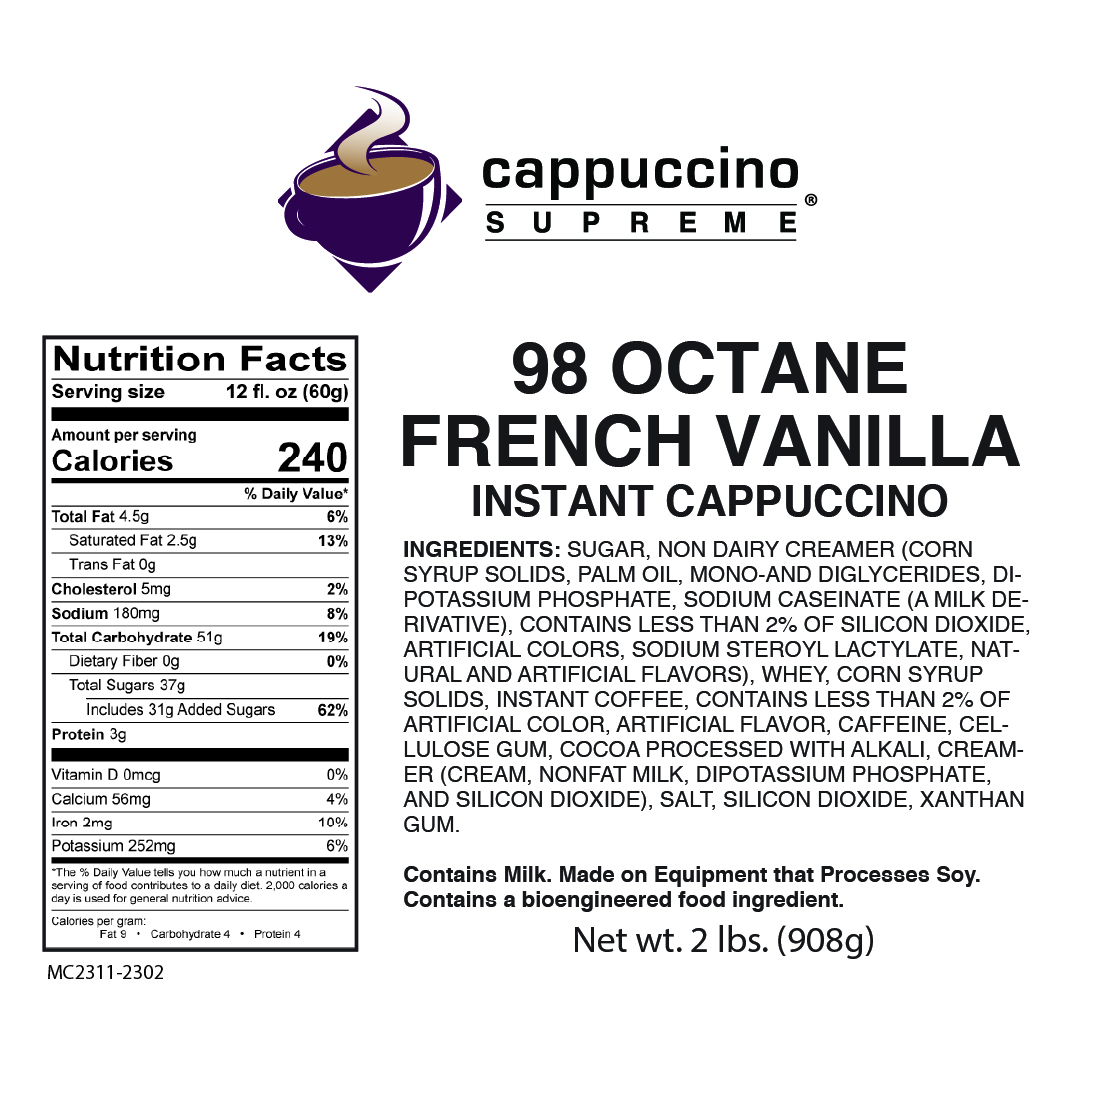 98 octane french vanilla cappuccino supreme nutrition and ingredients